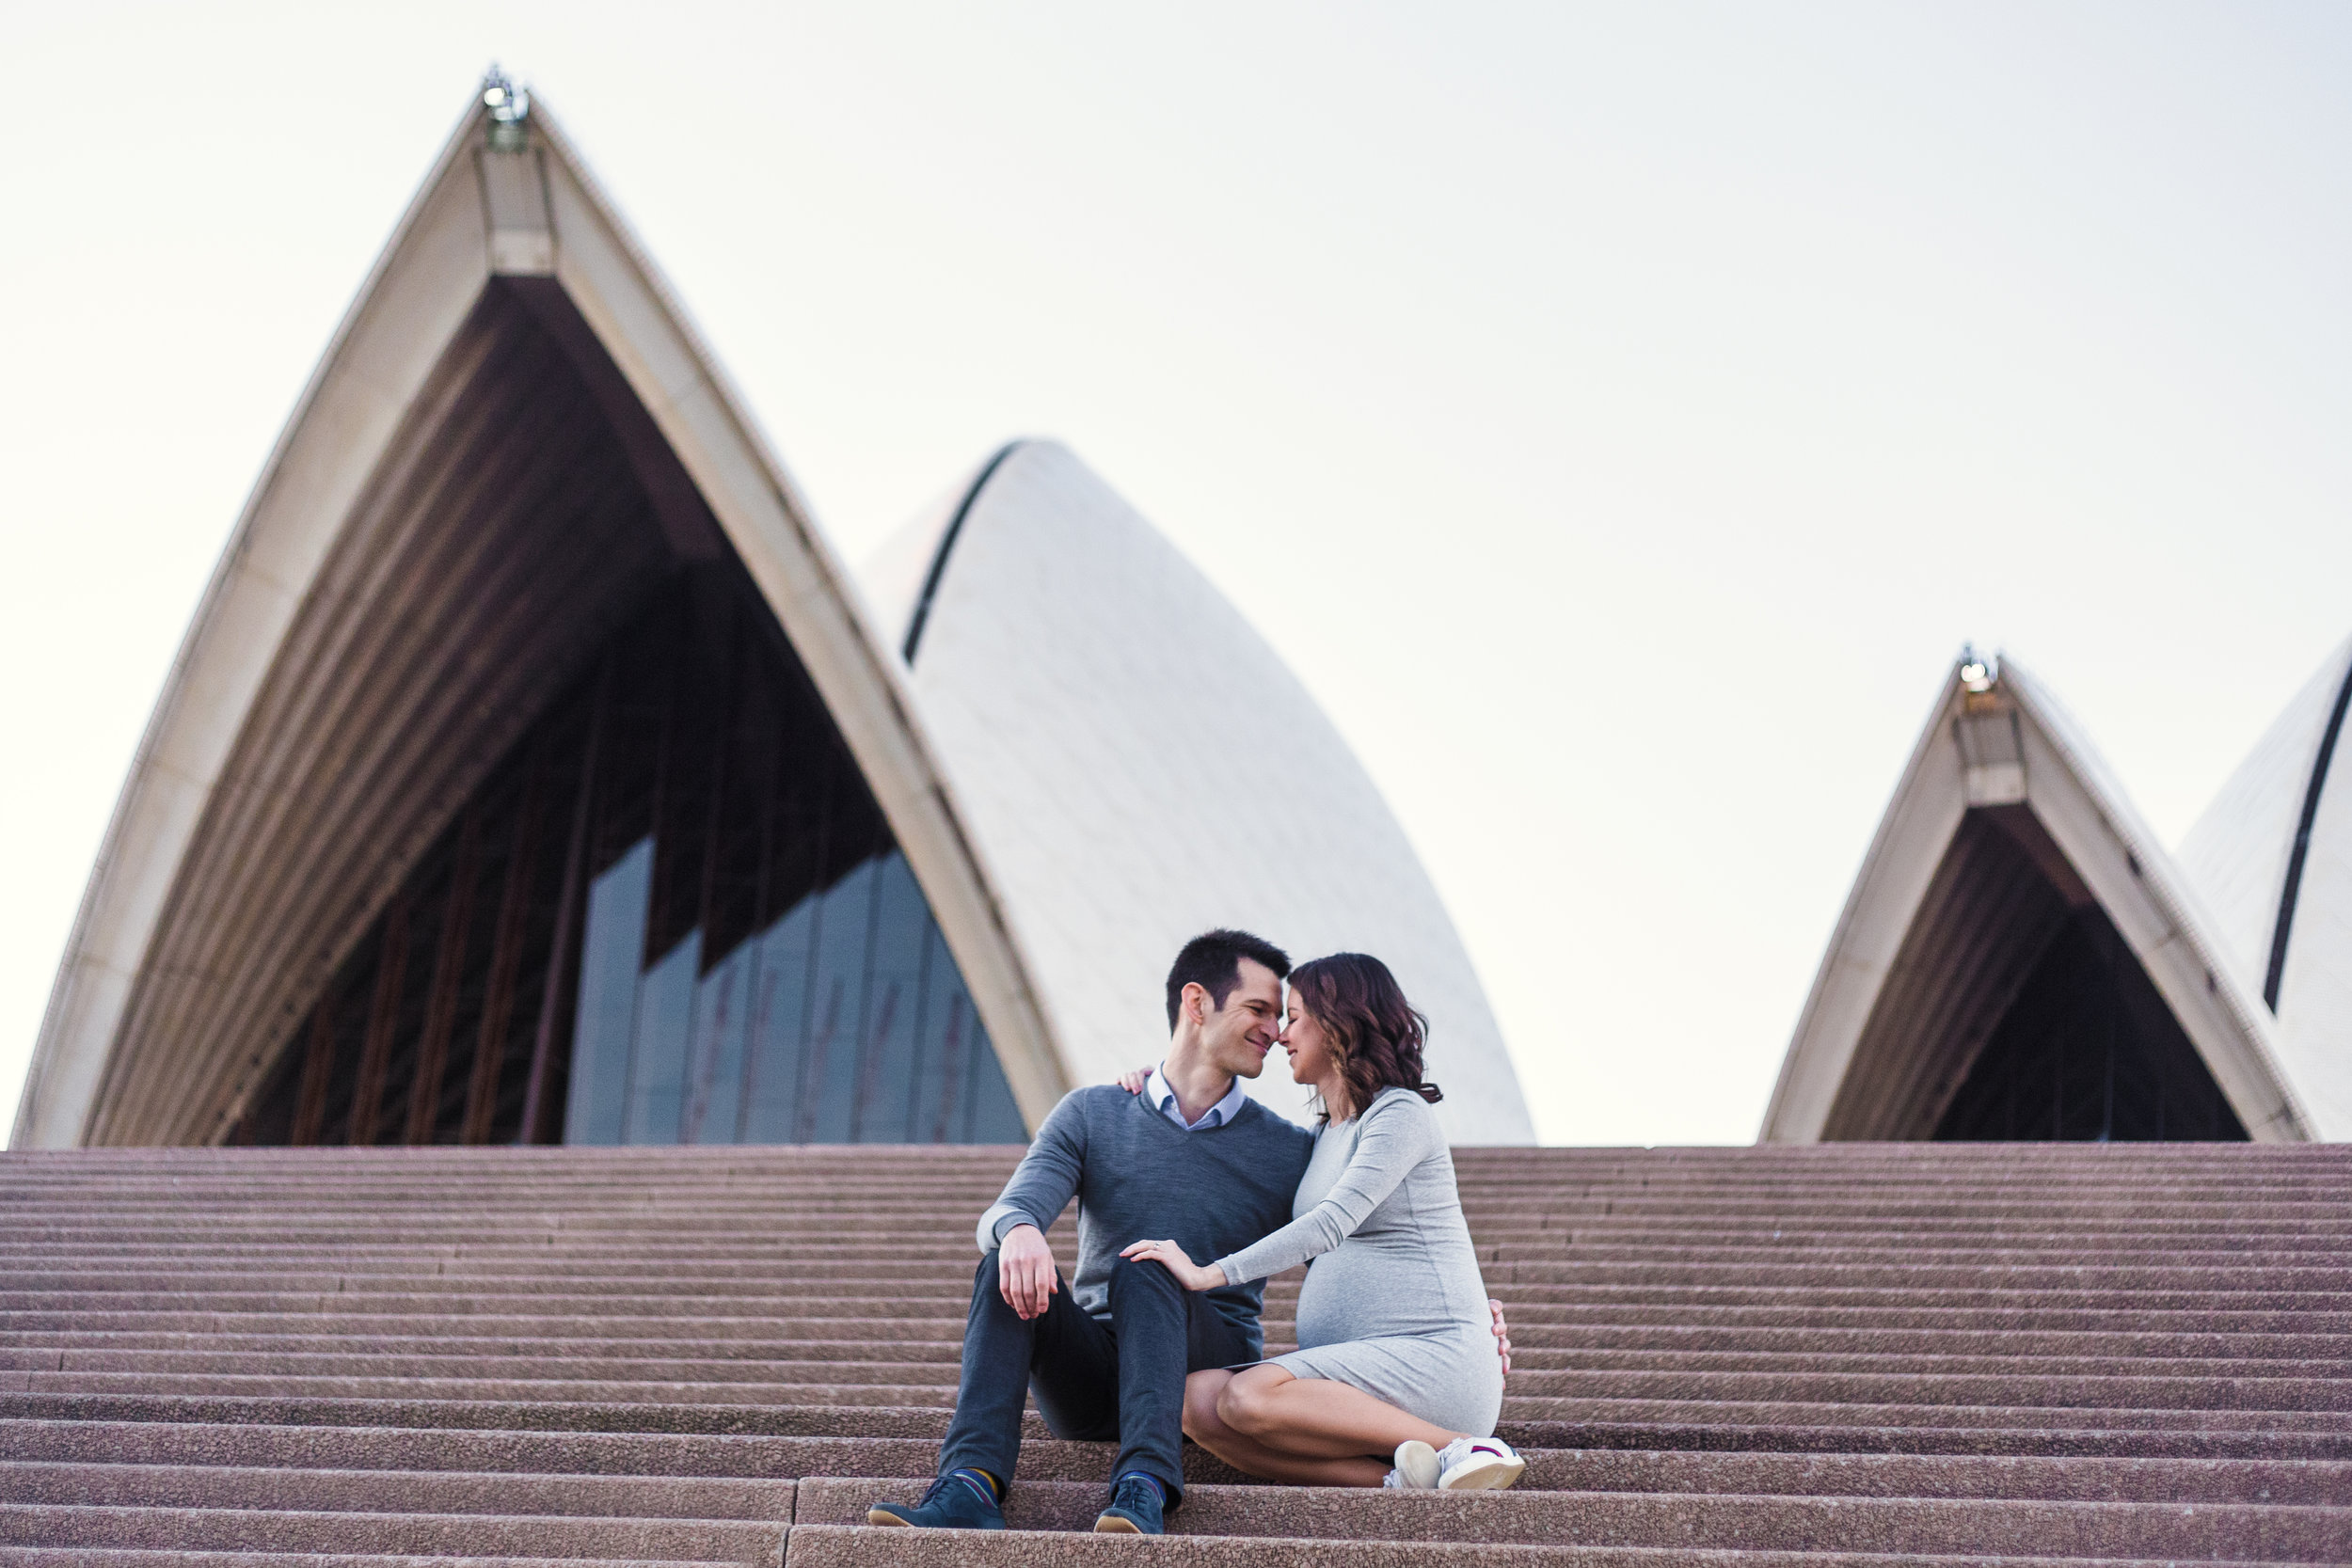 Photographed With Love - Maternity Photography Sydney